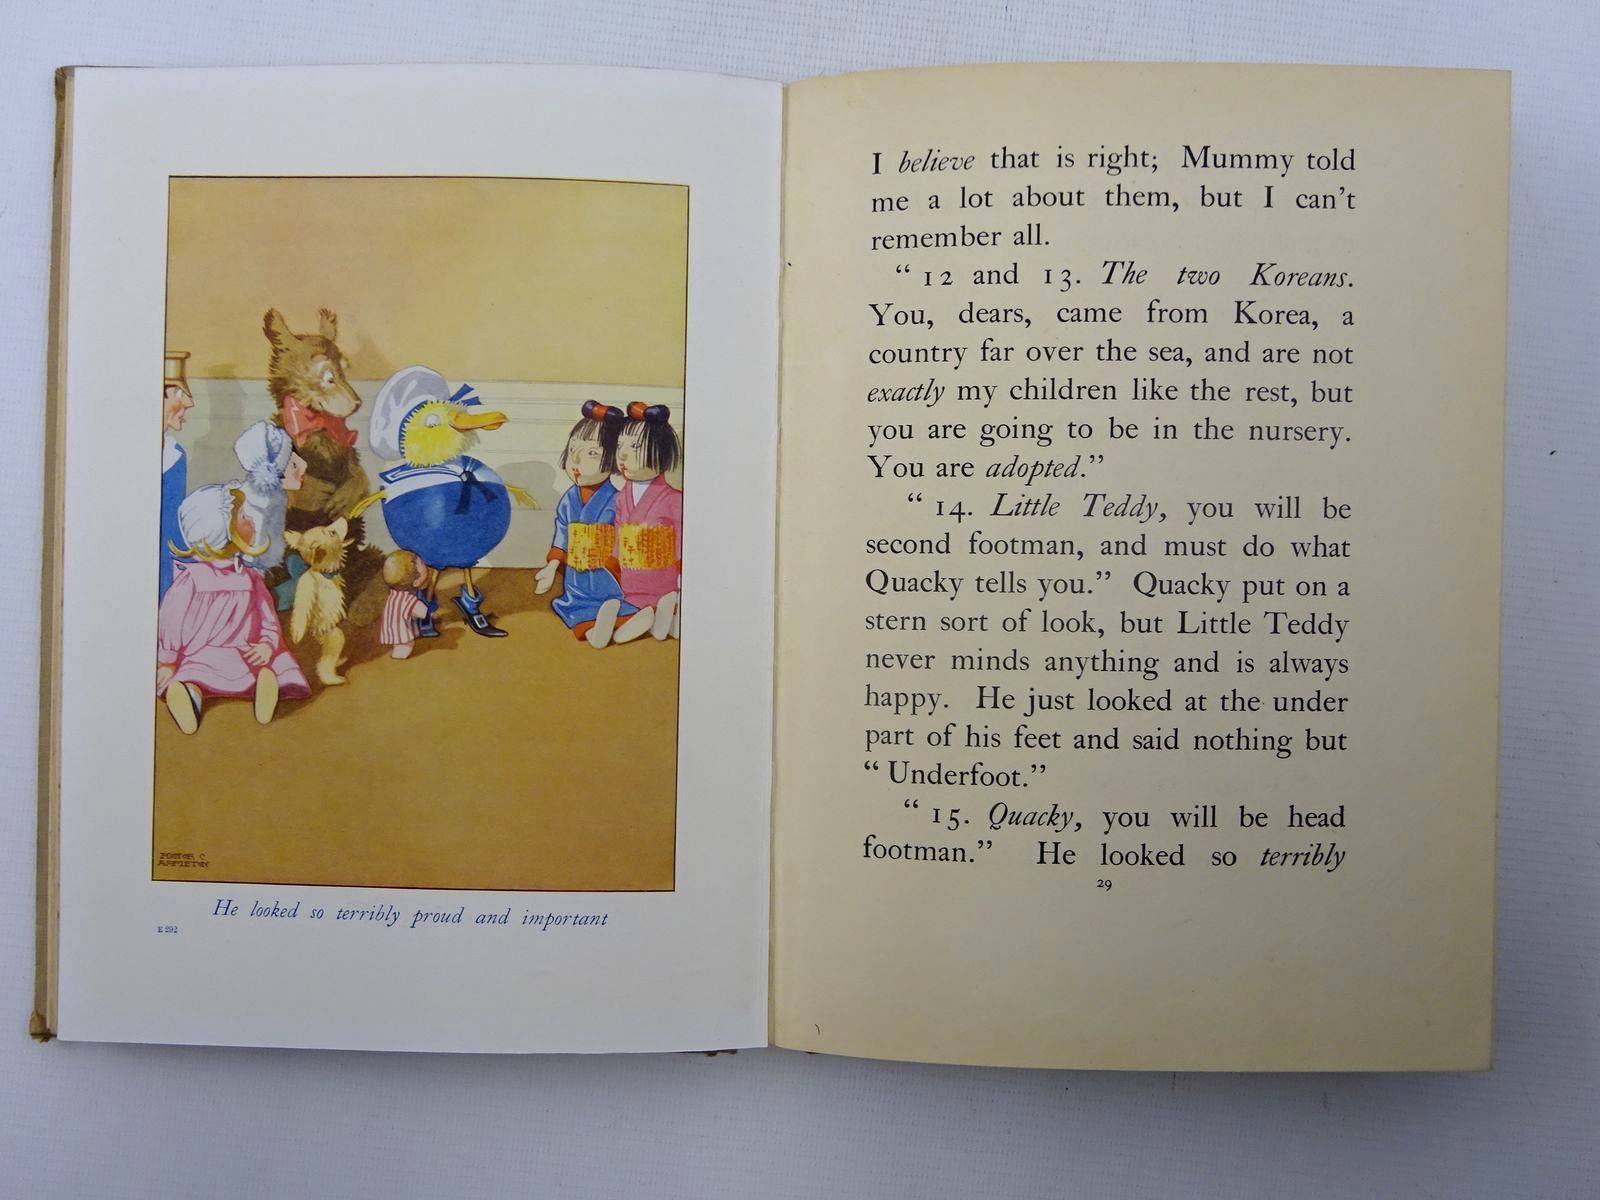 Photo of JOSEPHINE KEEPS HOUSE written by Cradock, Mrs. H.C. illustrated by Appleton, Honor C. published by Blackie & Son Ltd. (STOCK CODE: 2125664)  for sale by Stella & Rose's Books